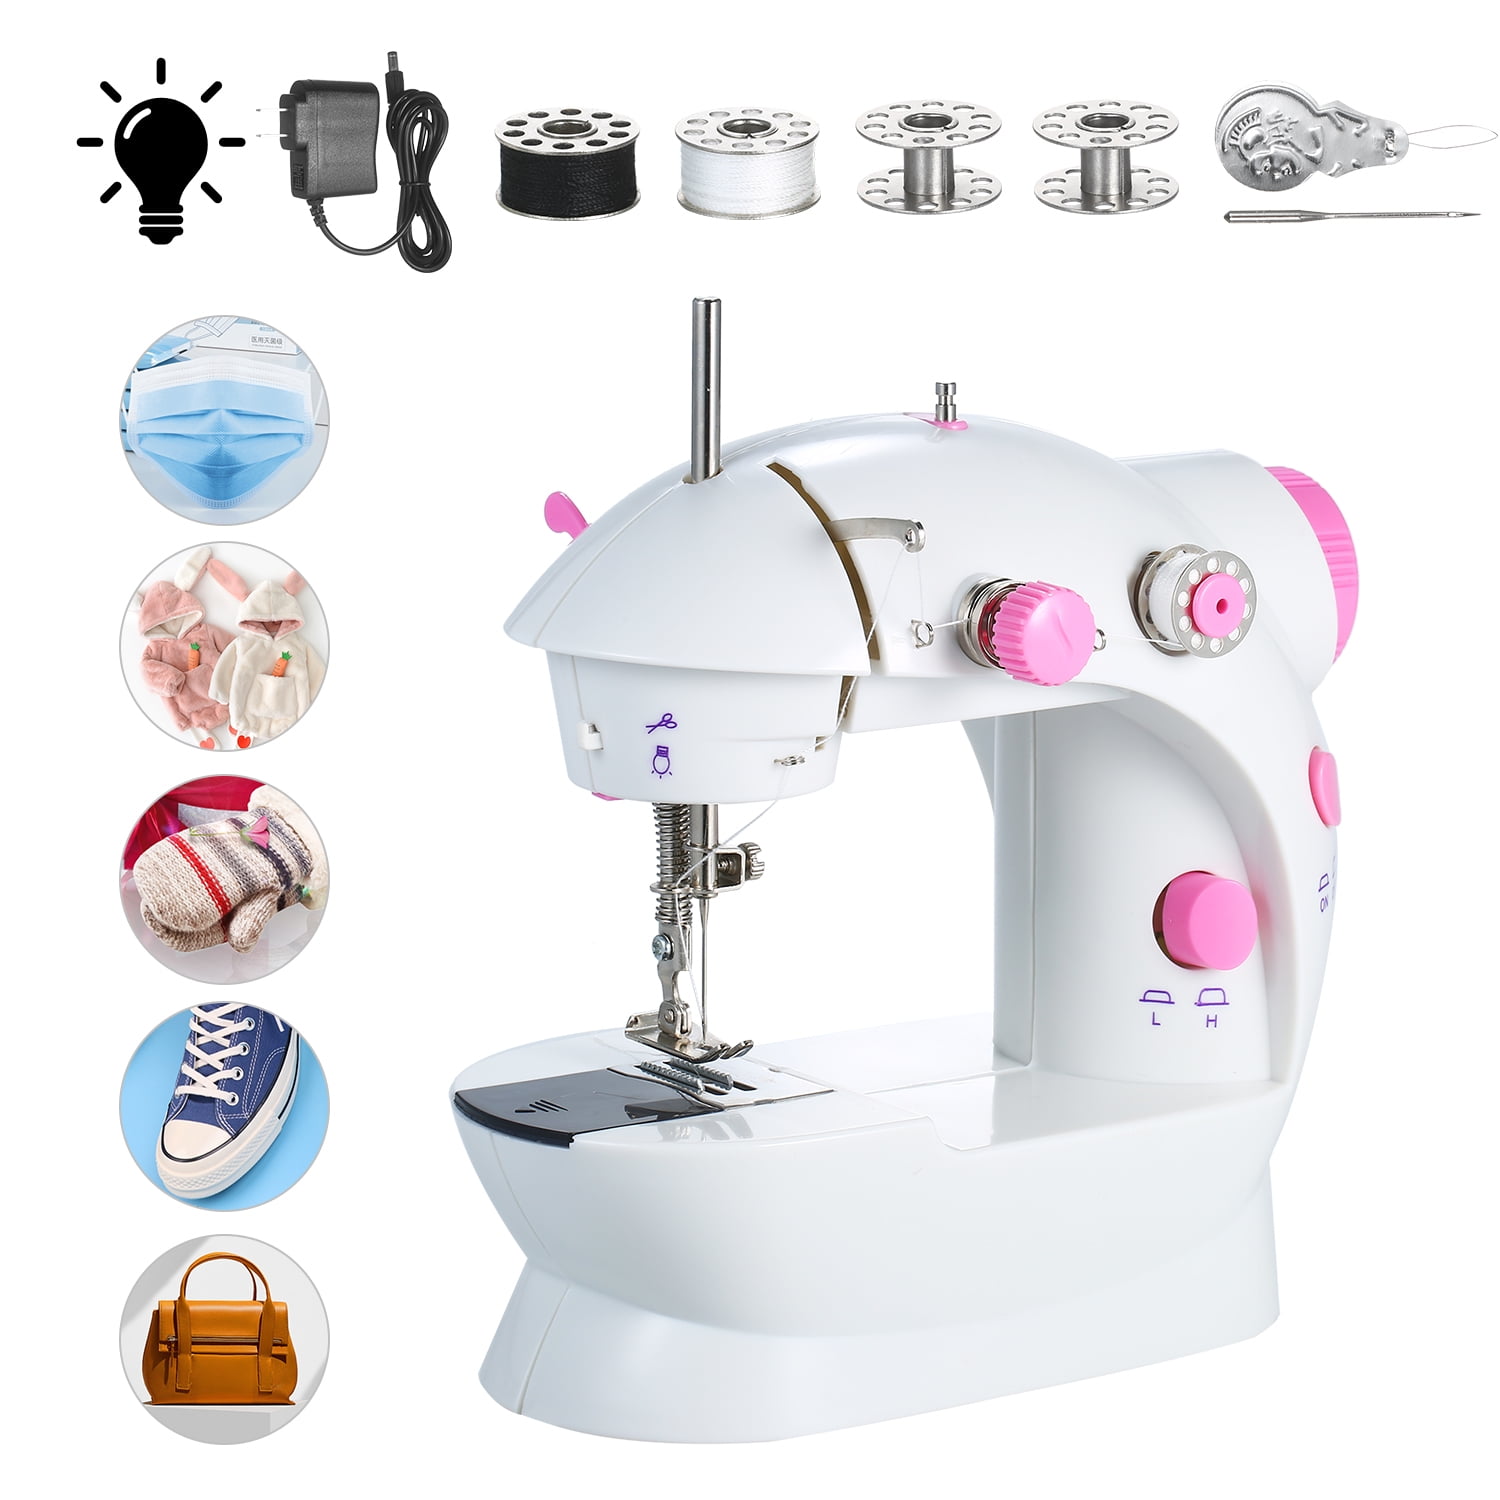 Green,American Standard Gets Mini Sewing Machine Electric Sewing Machine Household Portable Tailor Sewing Machine with Extended Table